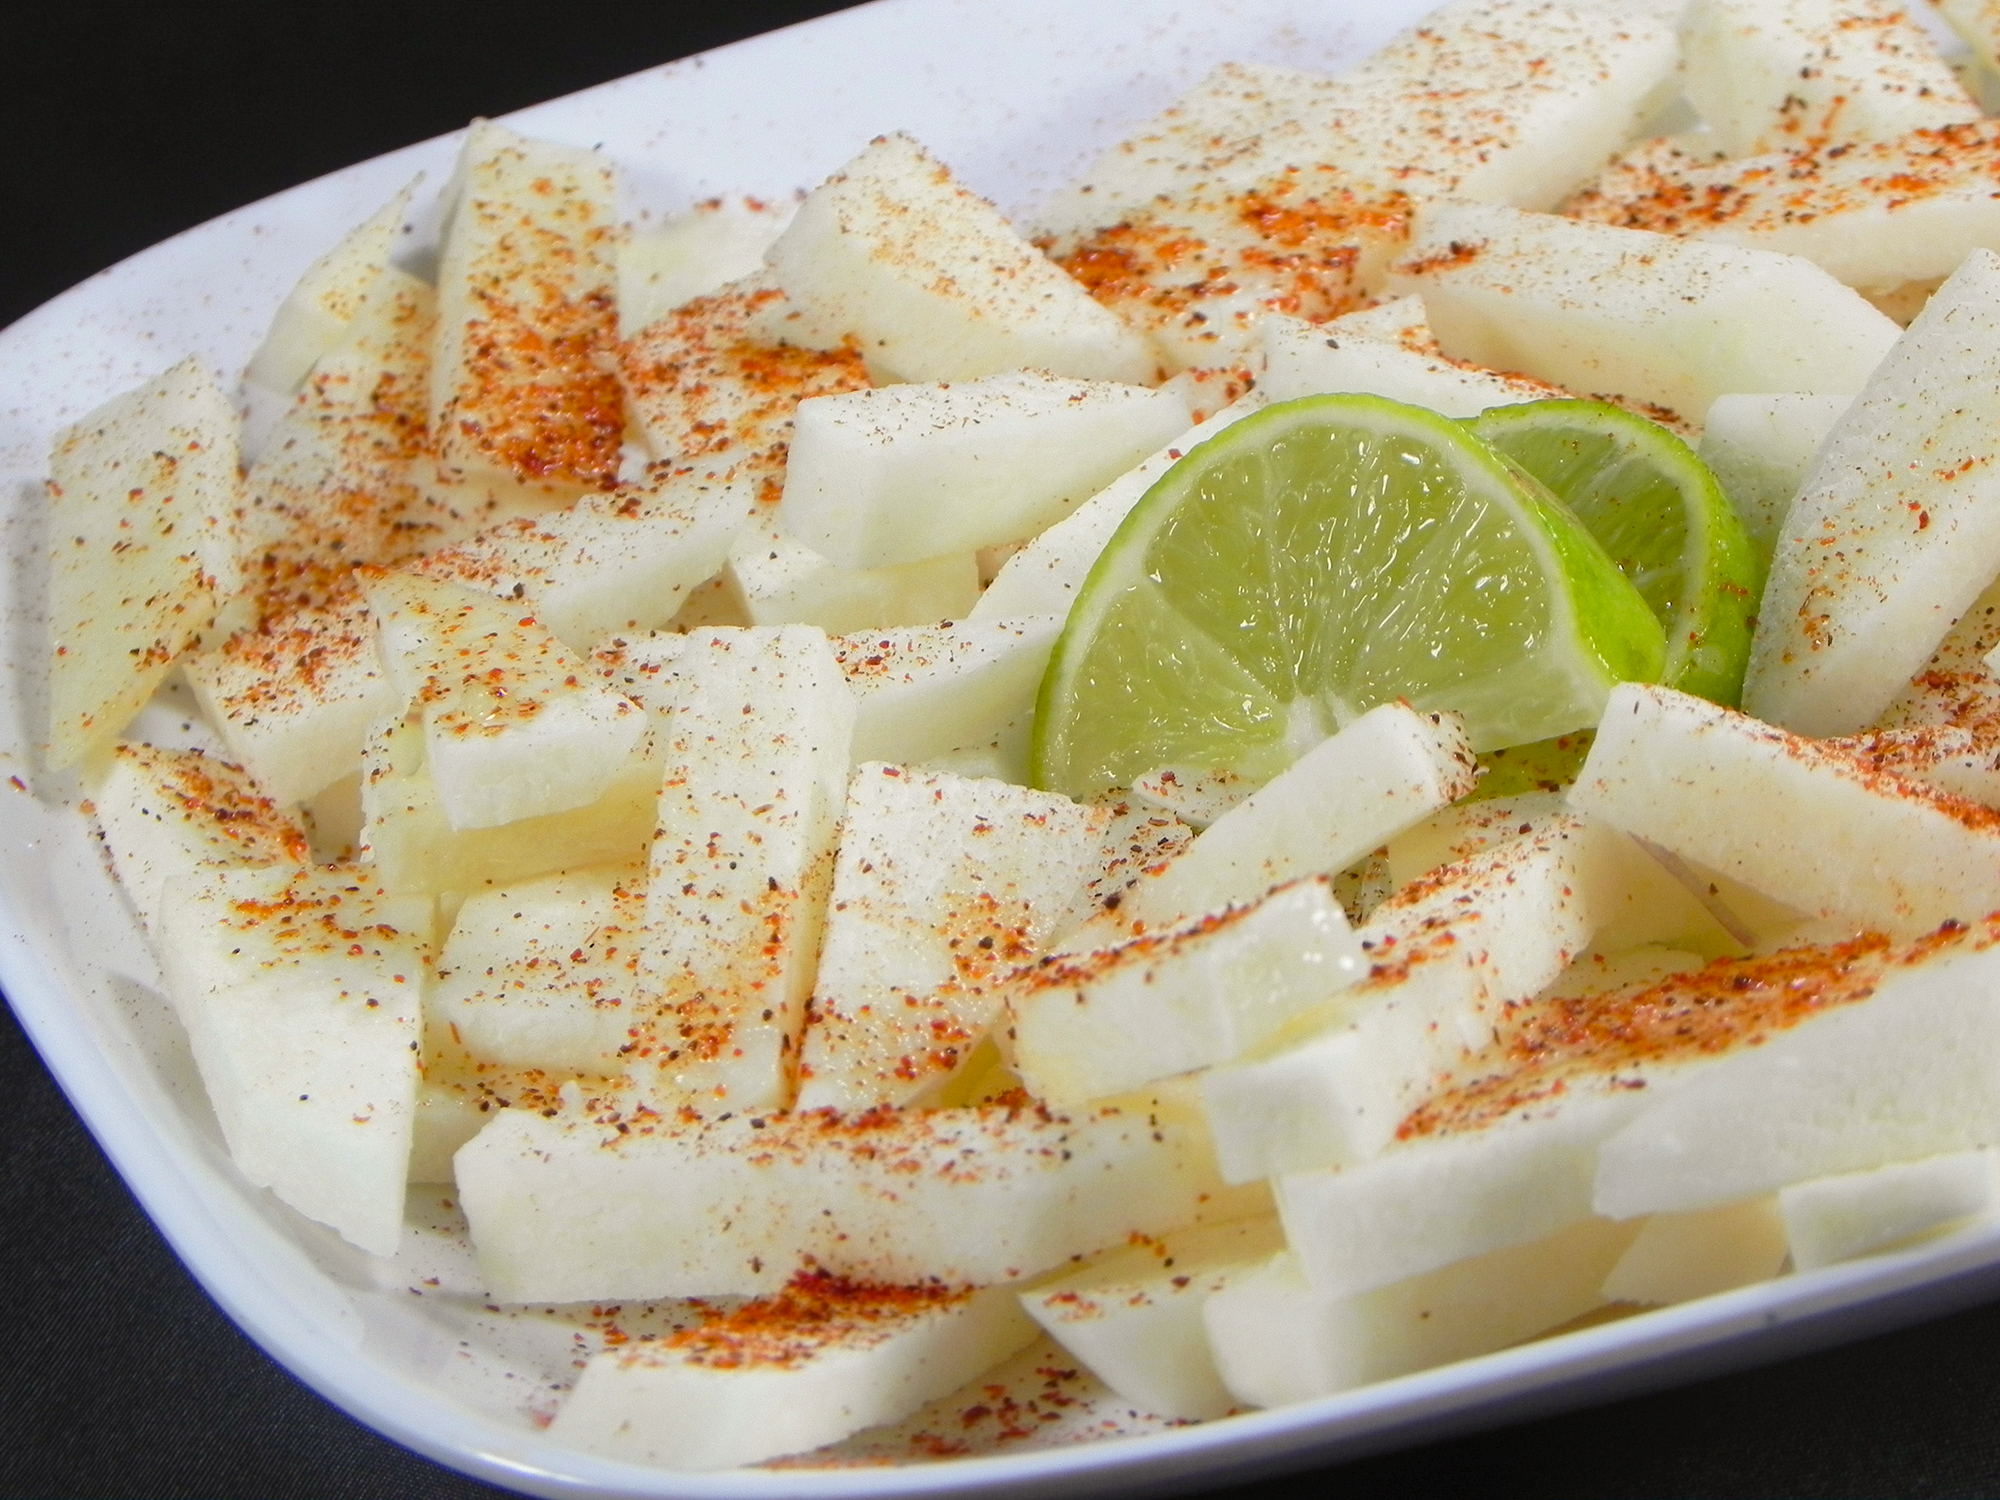 close up view of a Jicama Appetizer with jicama slices with seasoning and lime slices on a white plate